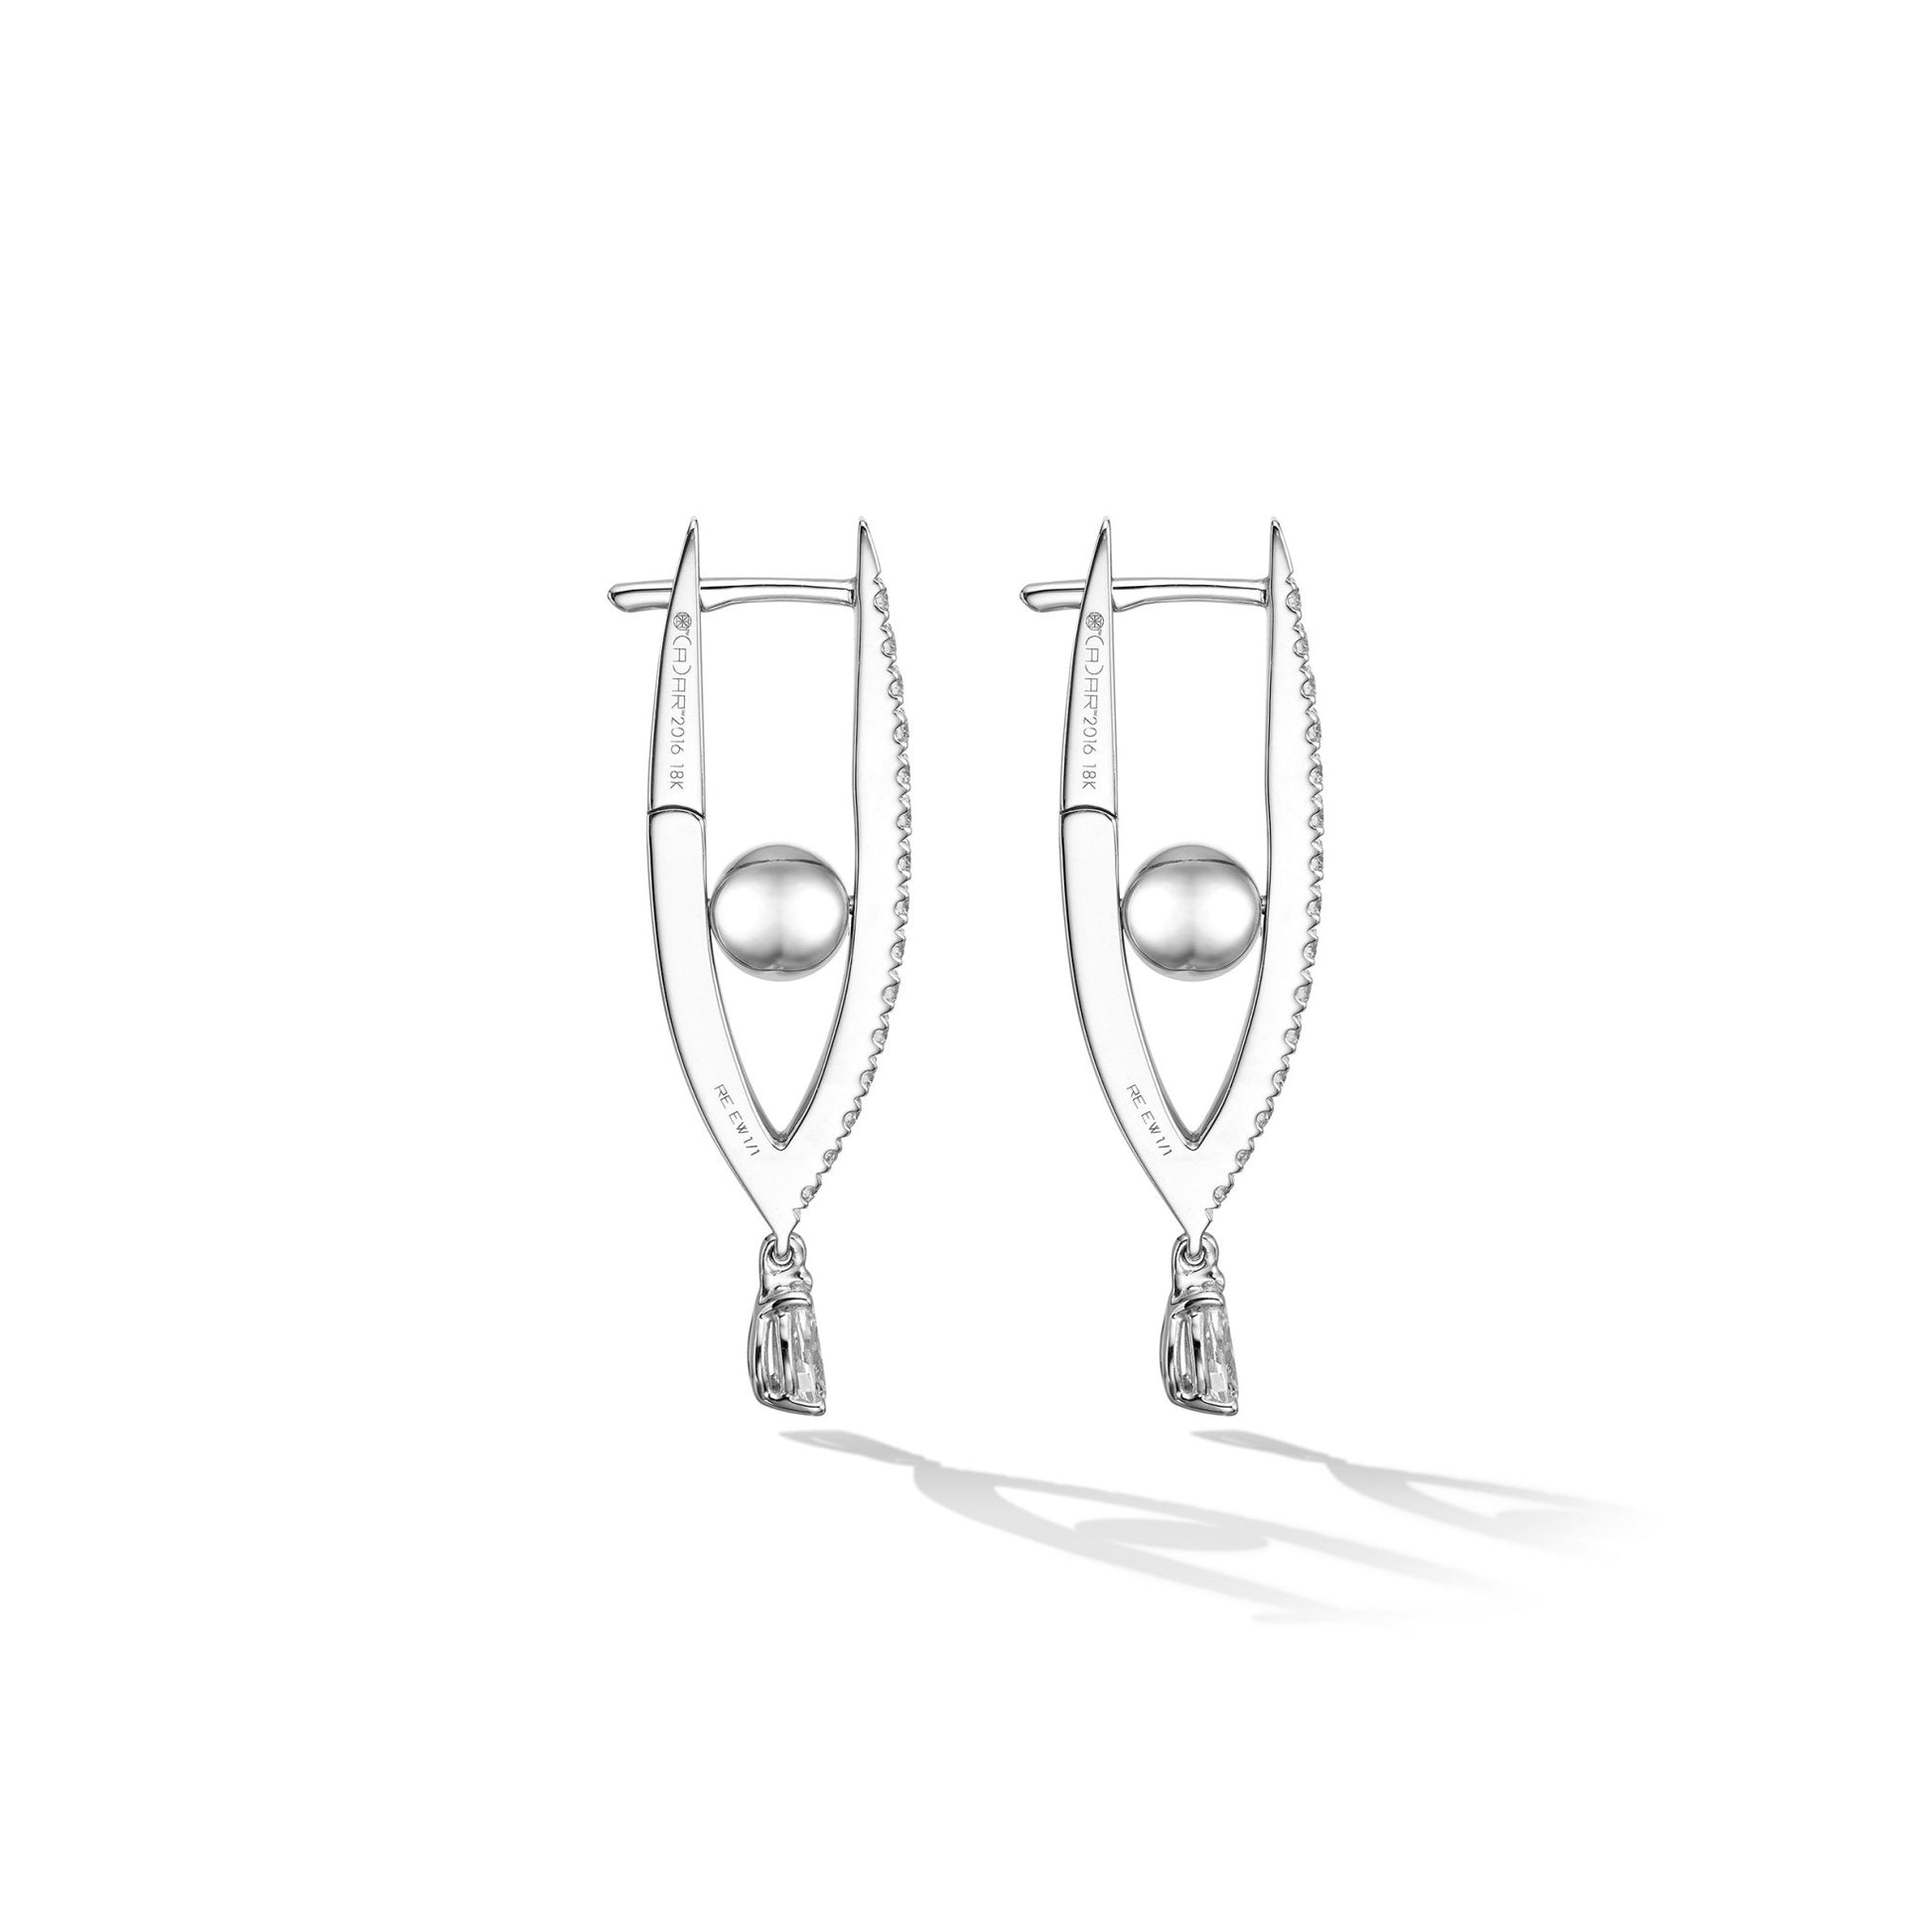 Small White Gold Reflections Hoop Earrings with White Diamonds - Cadar